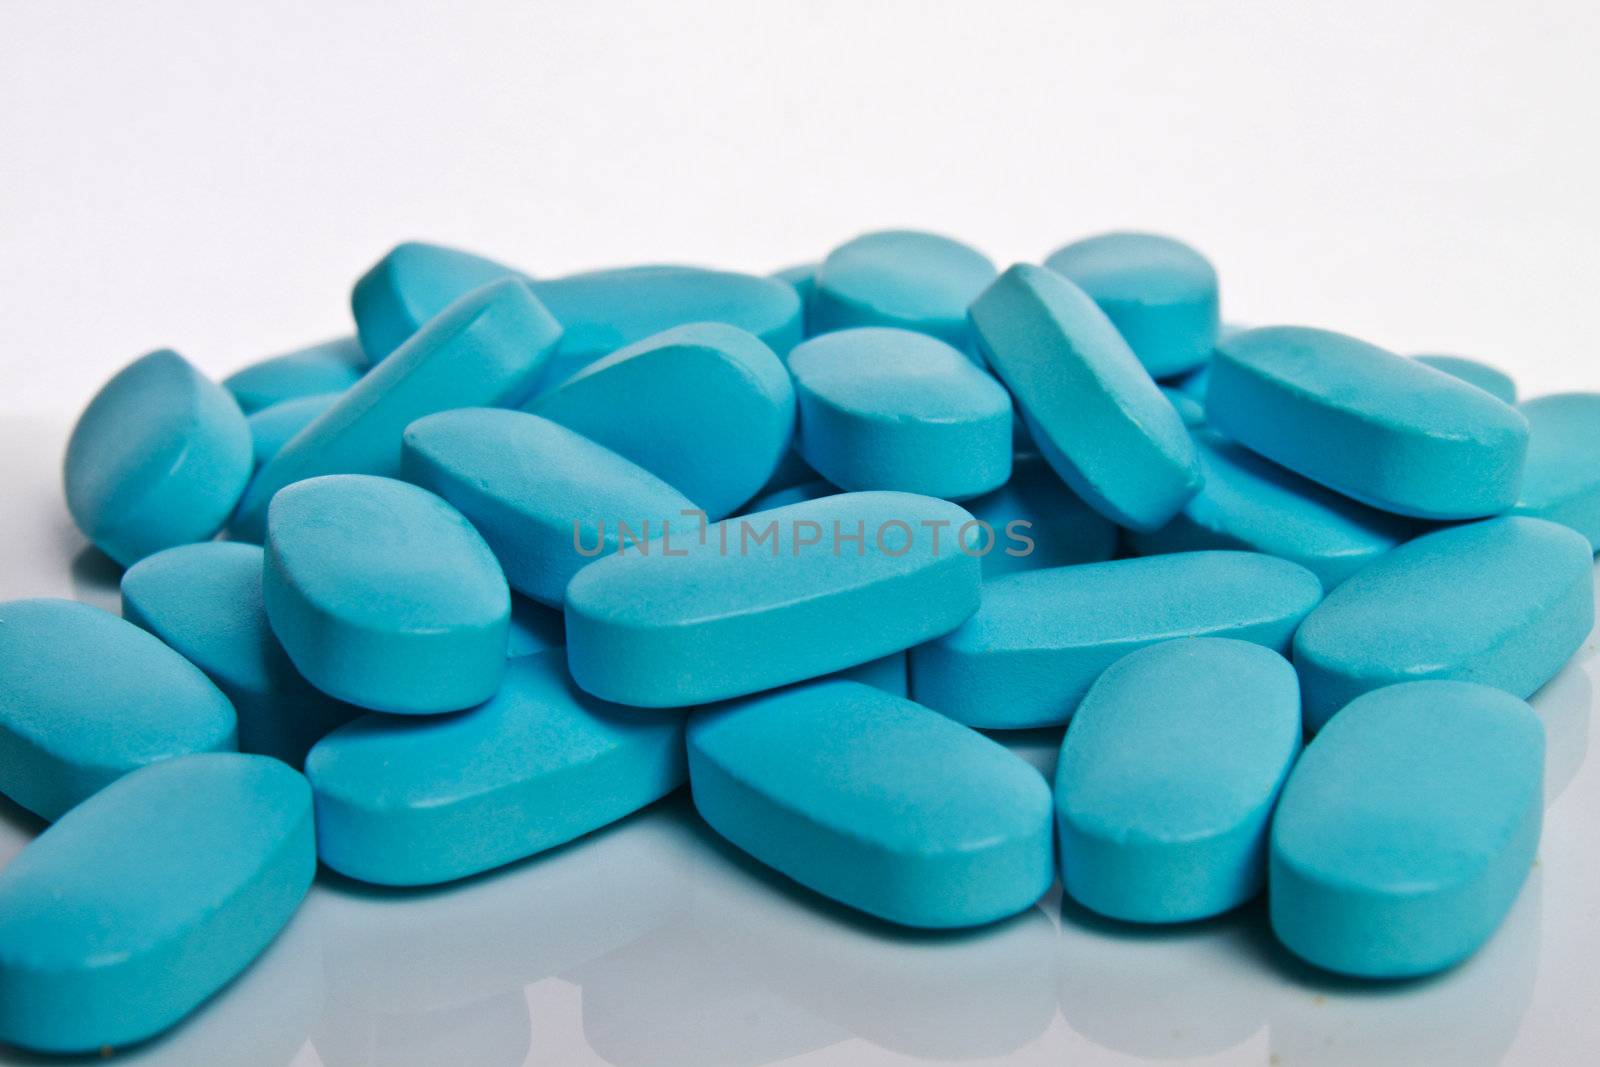 a bunch of blue pills on a white background